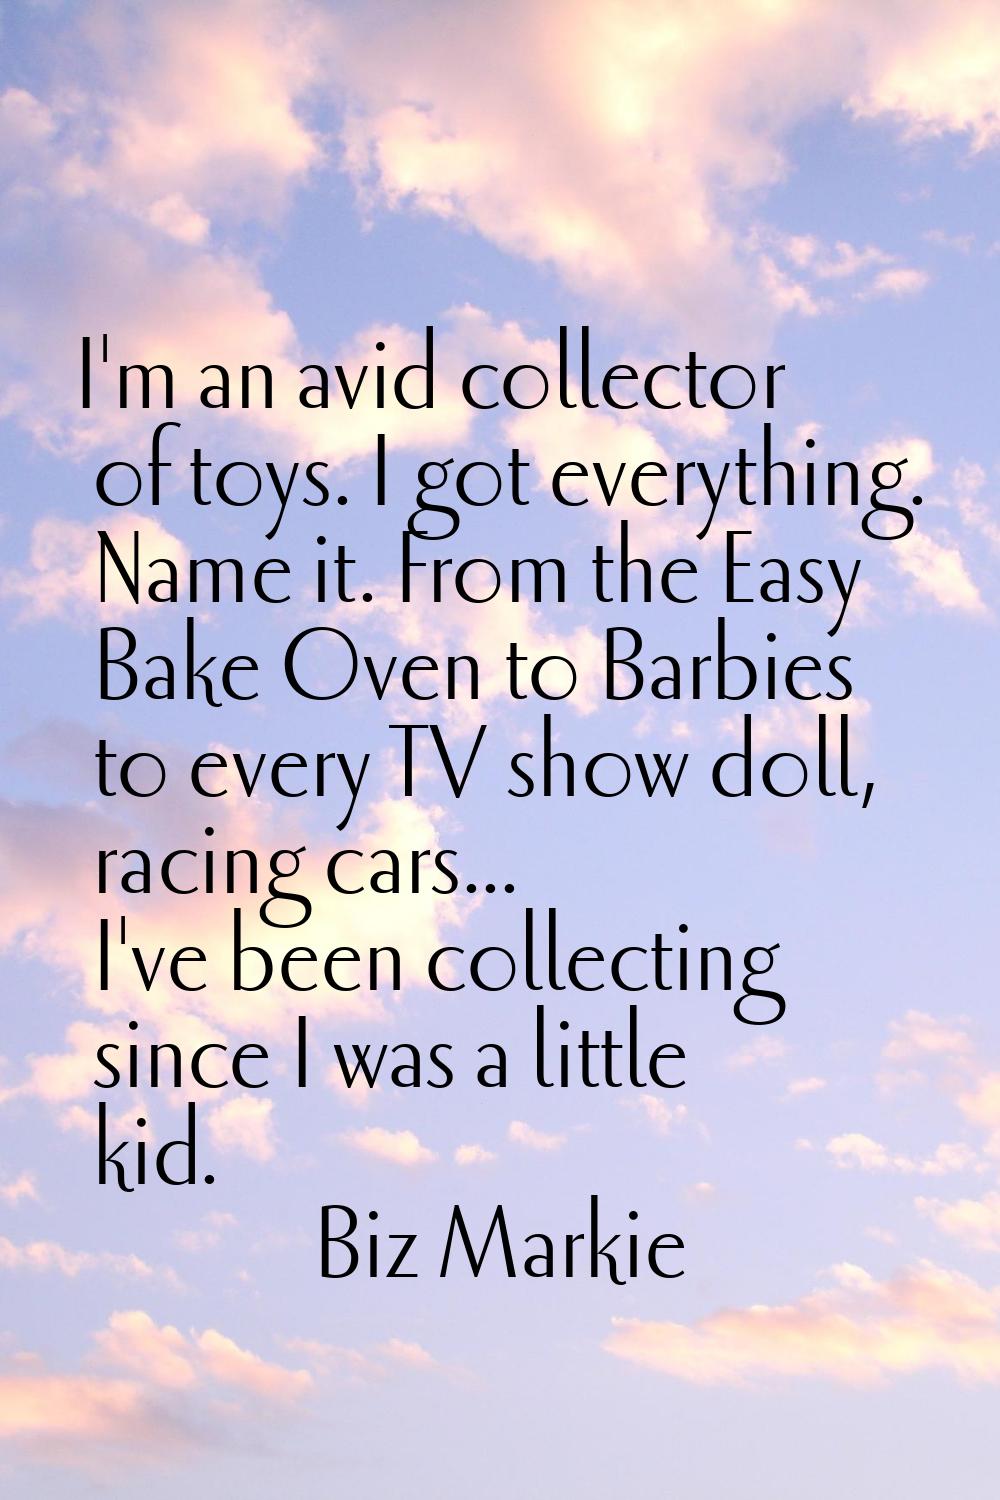 I'm an avid collector of toys. I got everything. Name it. From the Easy Bake Oven to Barbies to eve